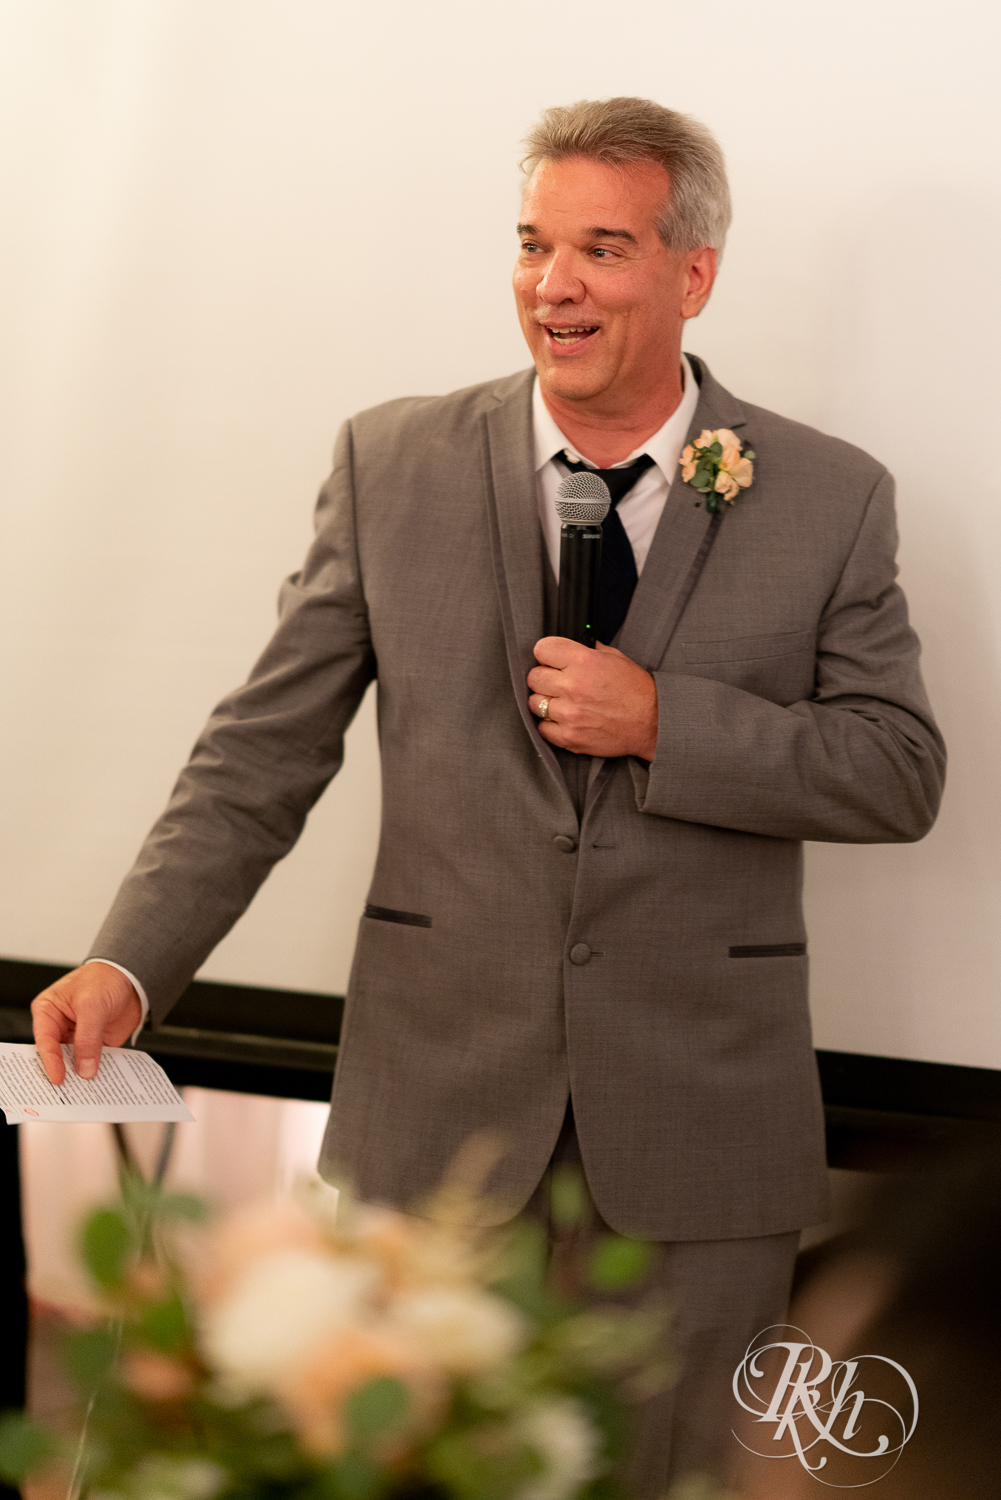 Father cries during speech during reception at The Chart House in Lakeville, Minnesota.